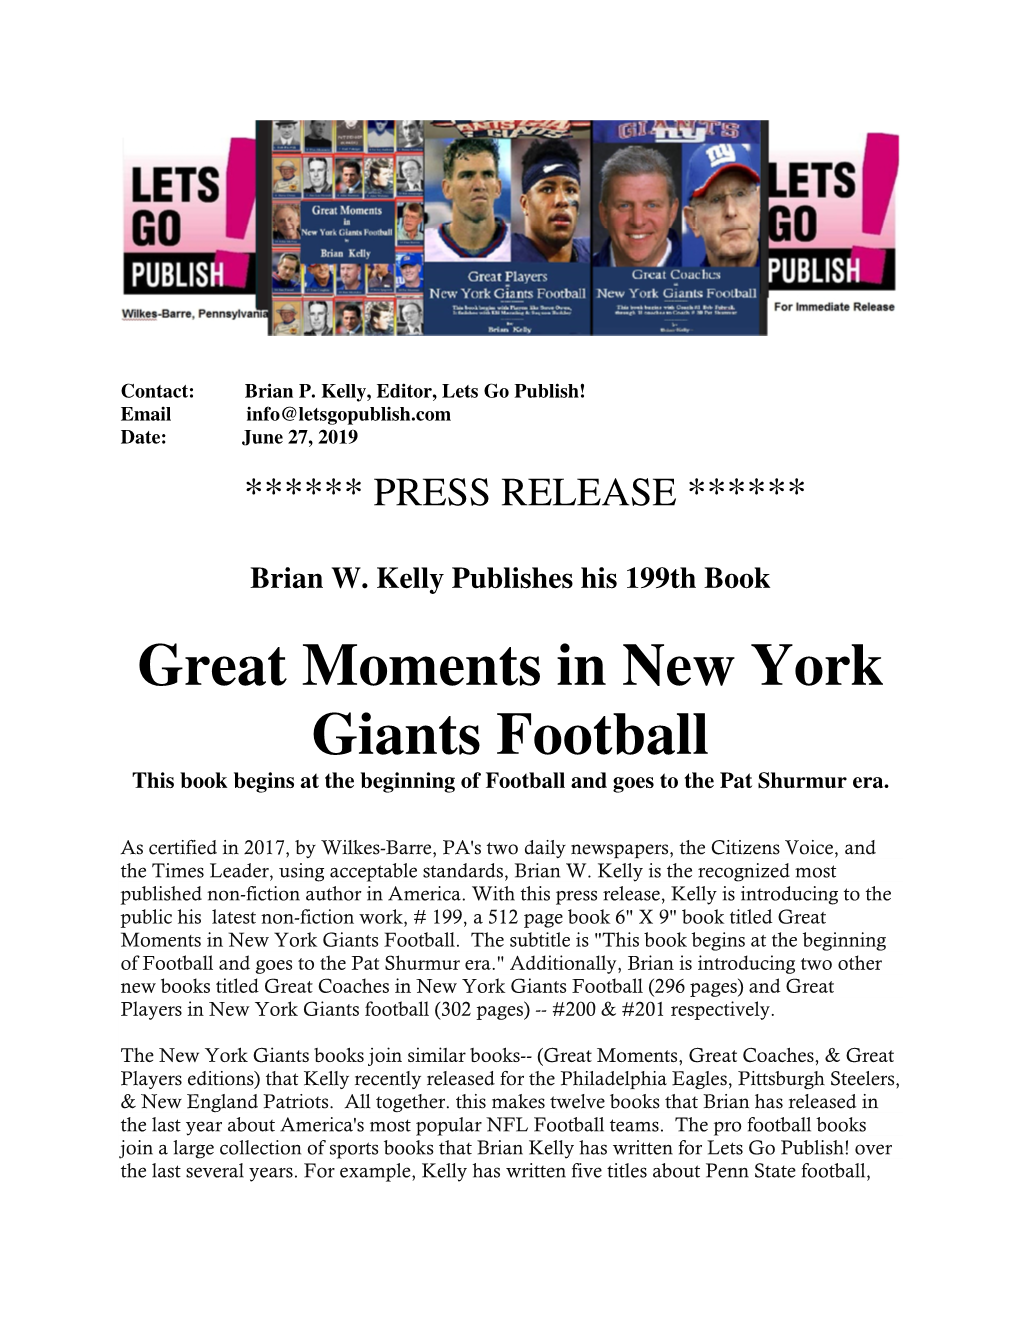 Great Moments in New York Giants Football This Book Begins at the Beginning of Football and Goes to the Pat Shurmur Era